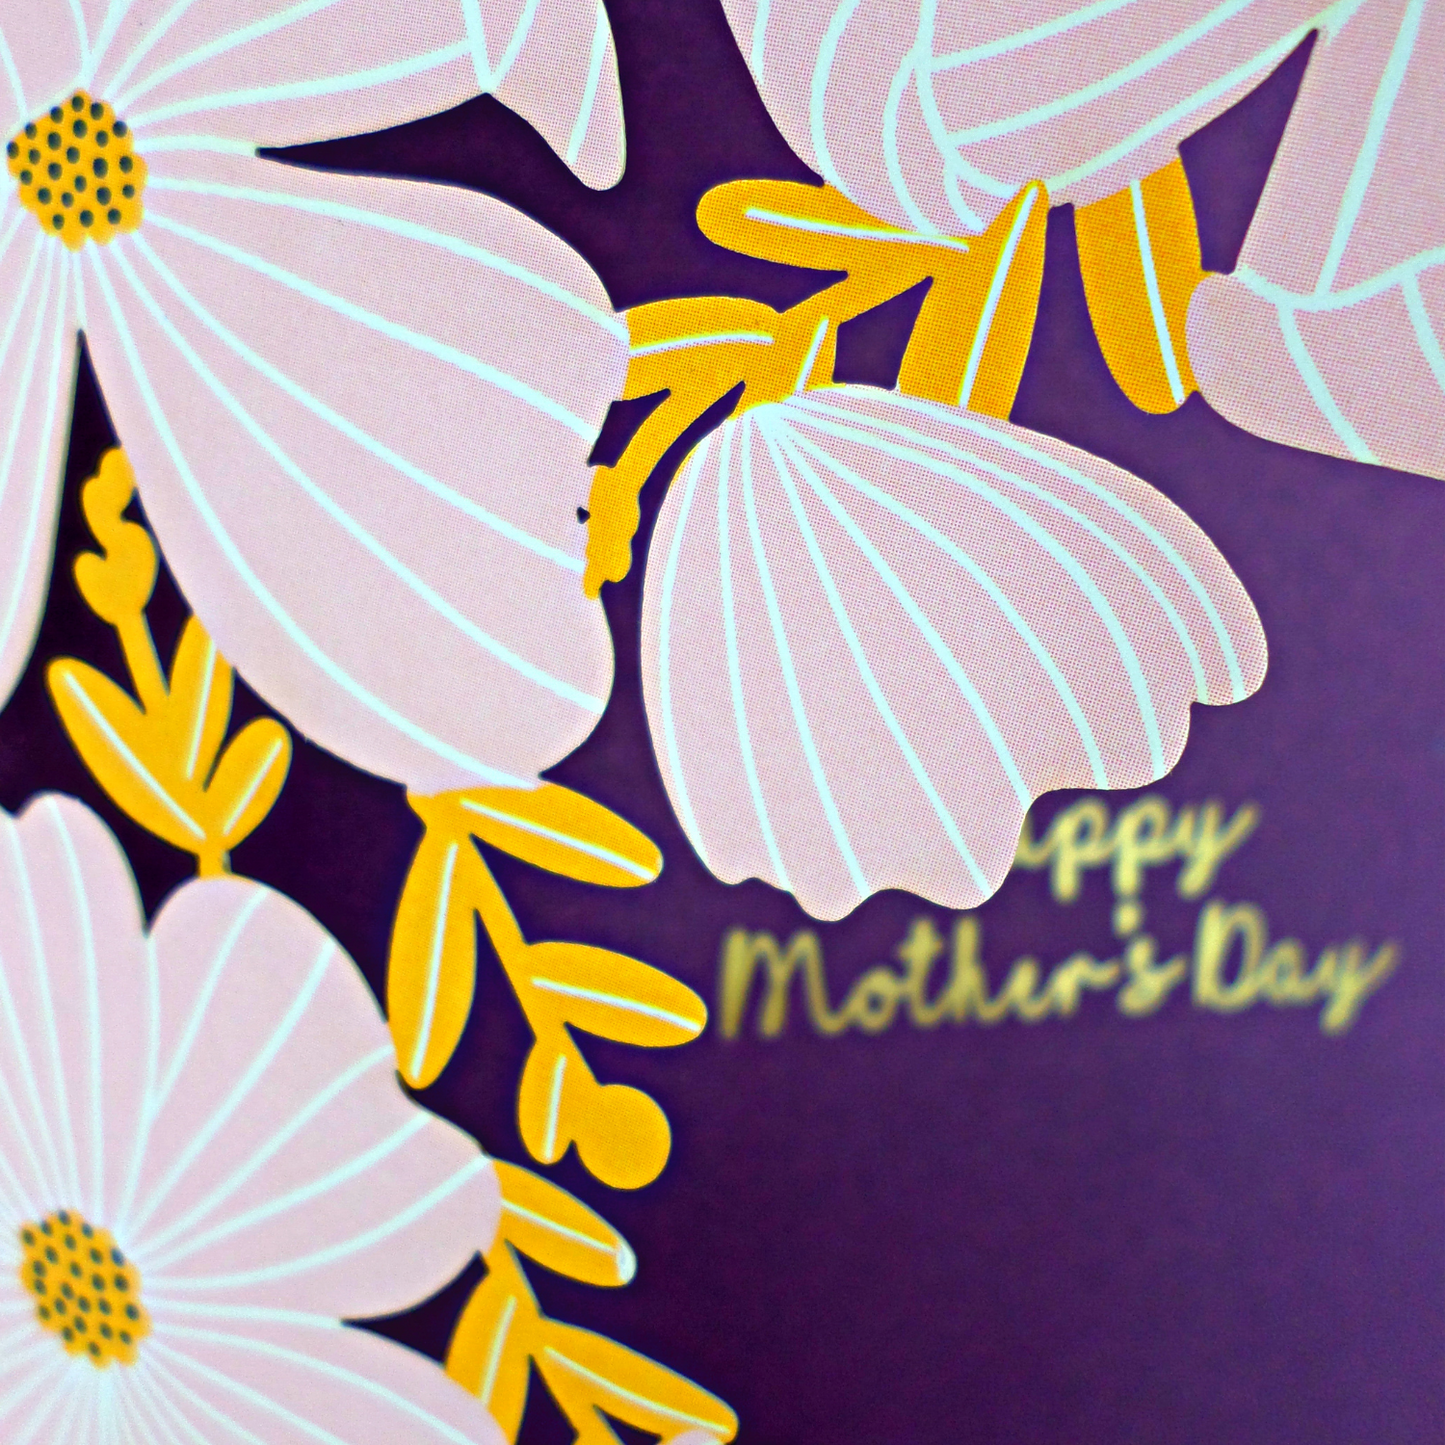 Paper Cut Art Blooming Floral Mother's Day Greeting Card